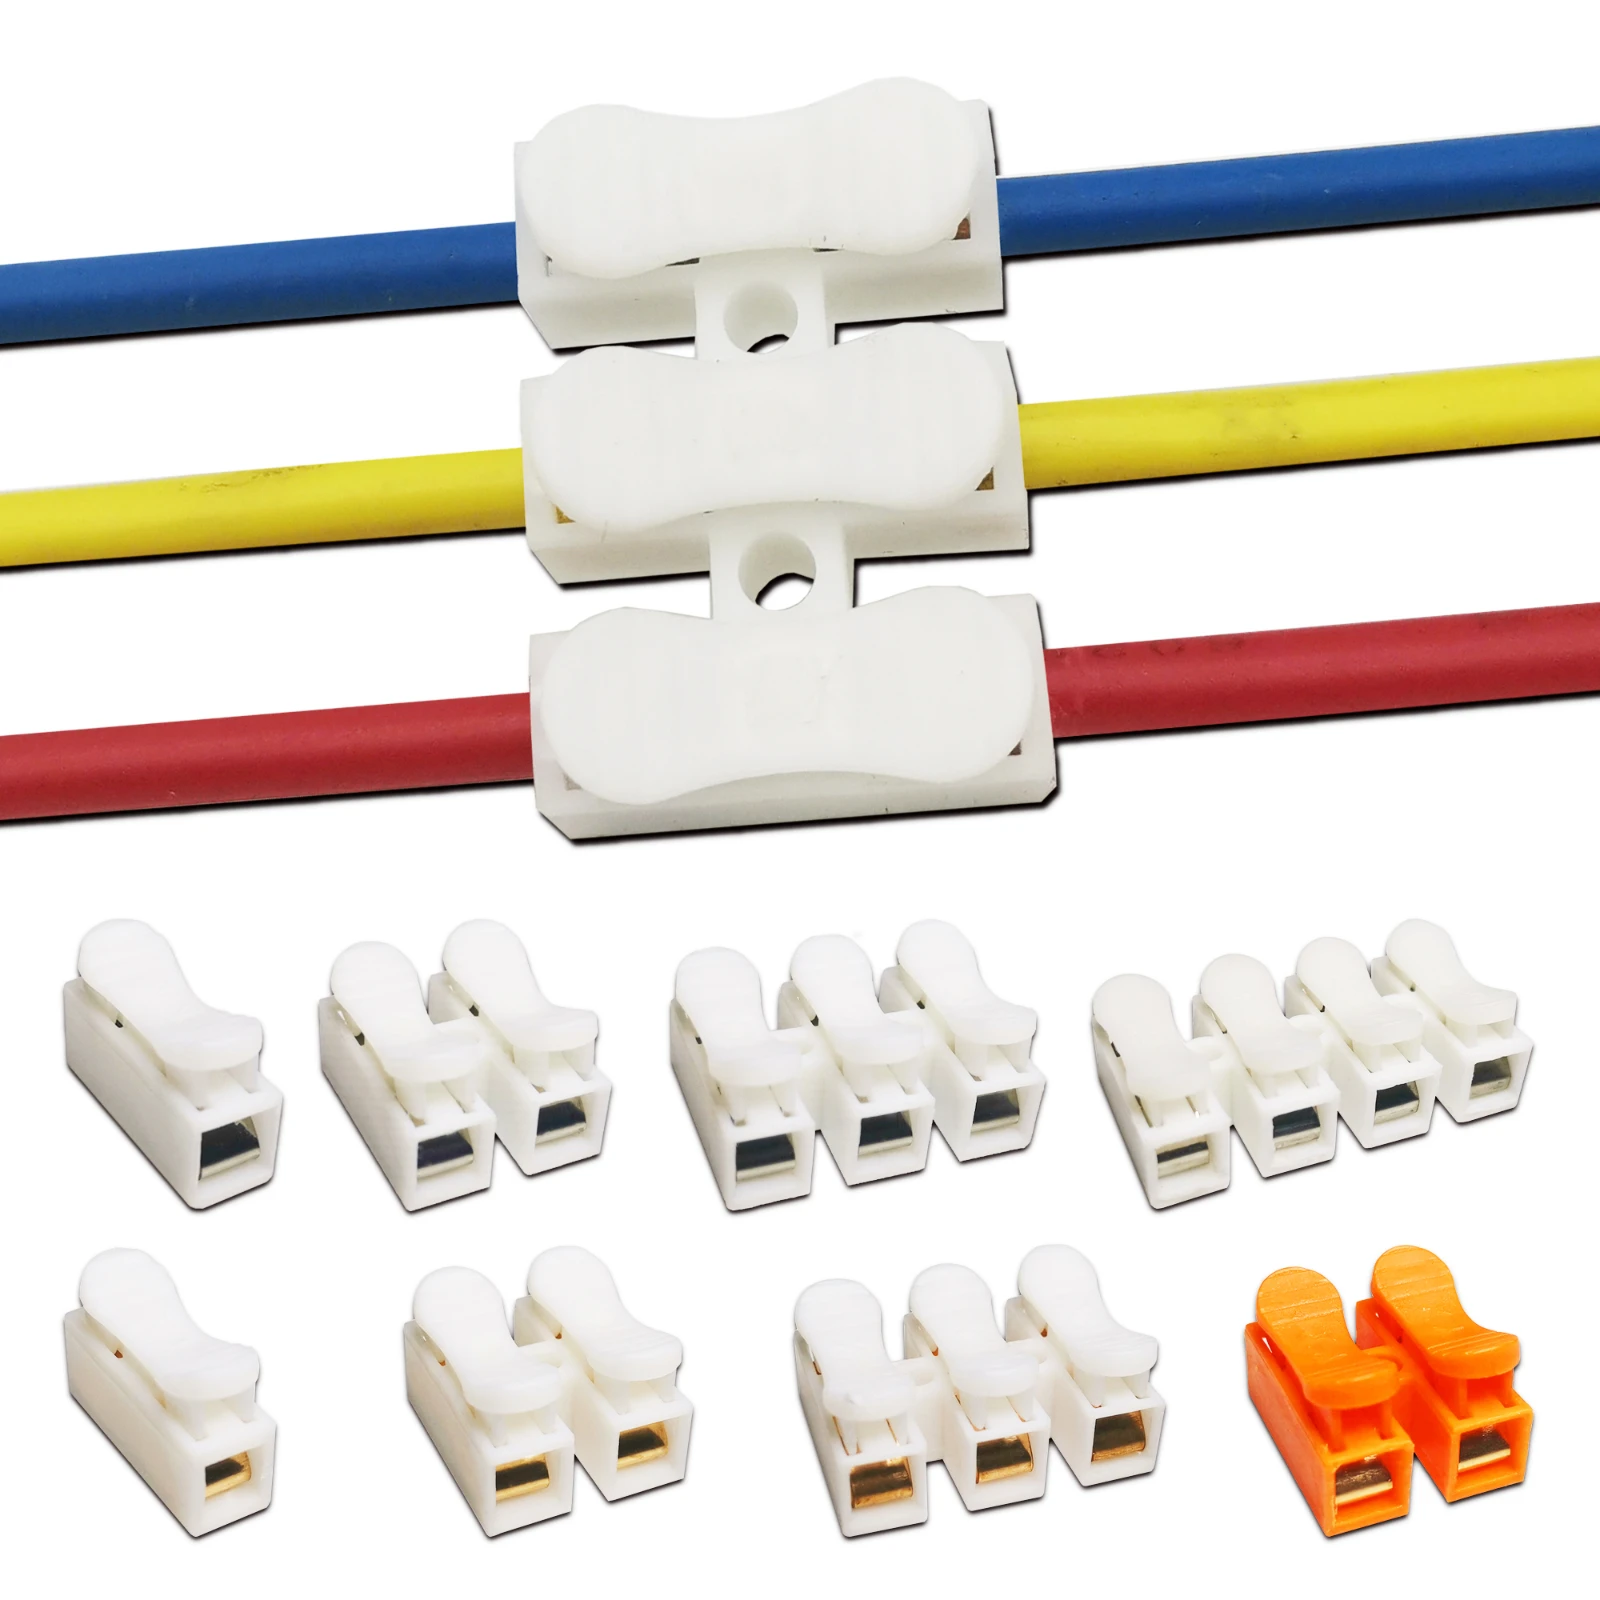 

CH1 CH2 CH3 CH4 Quick Splice Lock Wire Connectors 1/2/3/4Pins Copper Electrical Cable Terminals For Easy Safe Splicing Into Wire